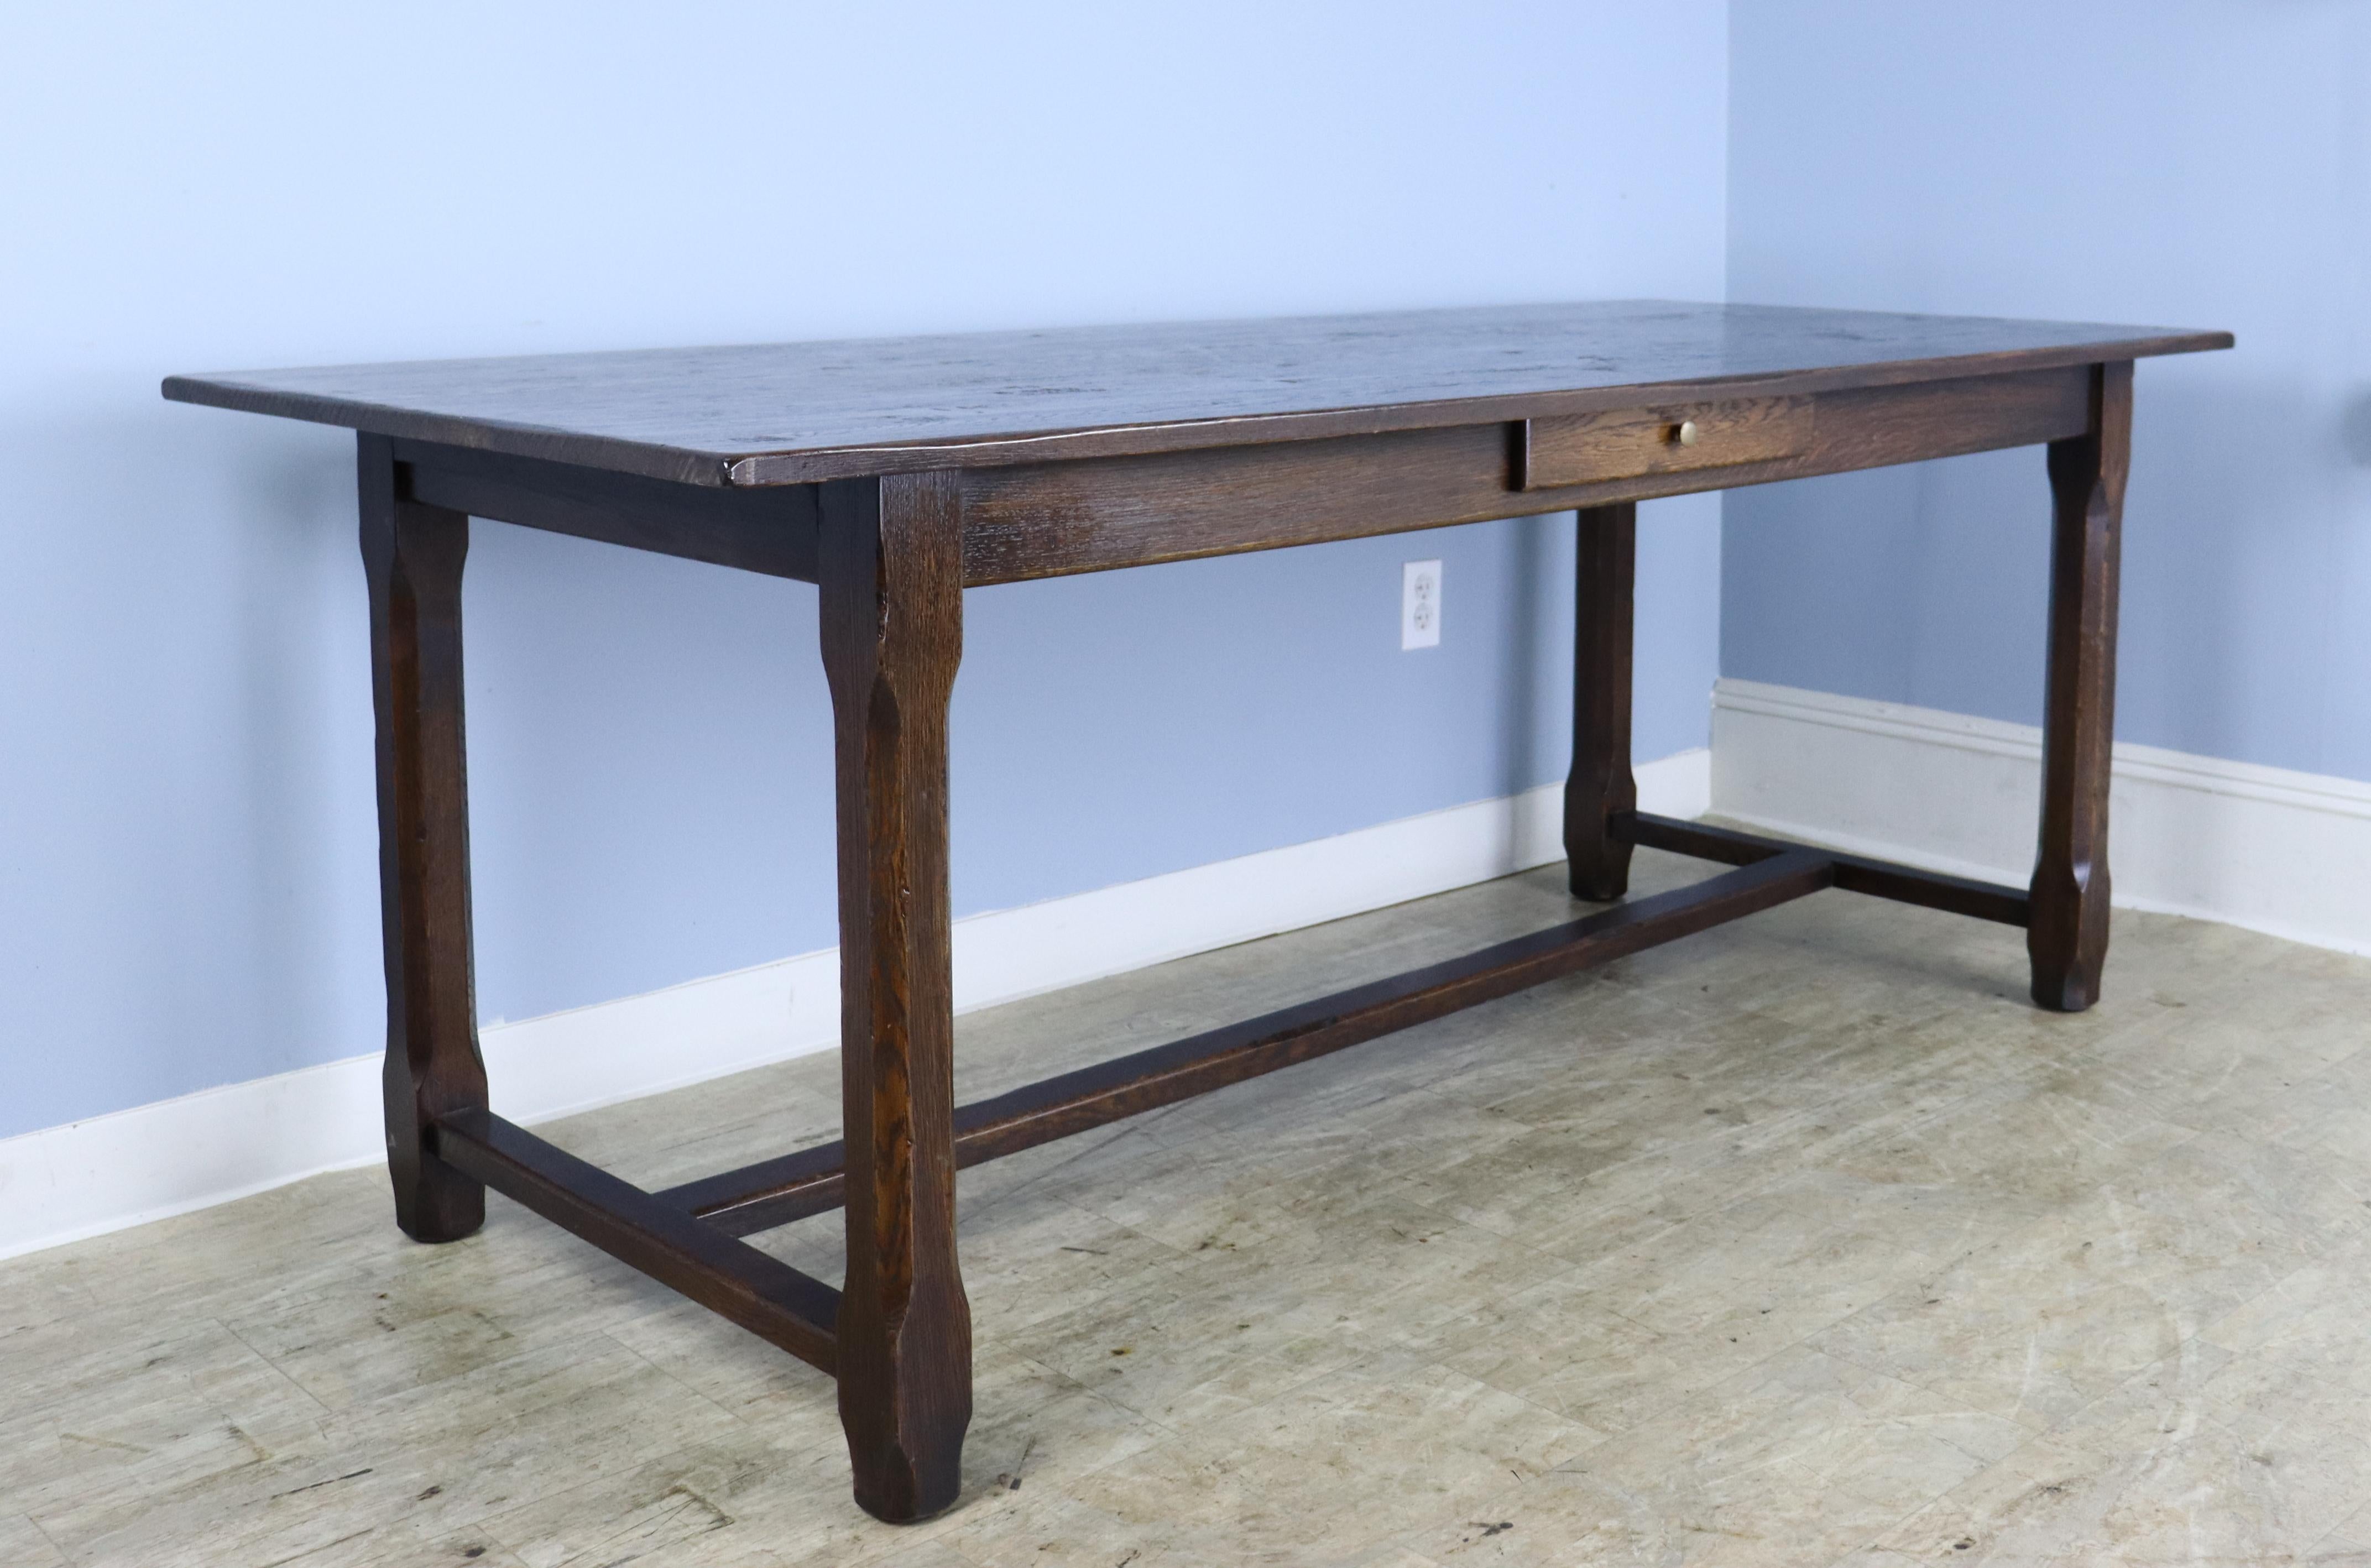 A large oak trestle based vintage farm table with the look of an antique. Good dark oak color and vivid grain. Immaculate and clean with a single drawer for interest.   Apron height of 25.75″ is quite generous, and there are 61″ between the legs on